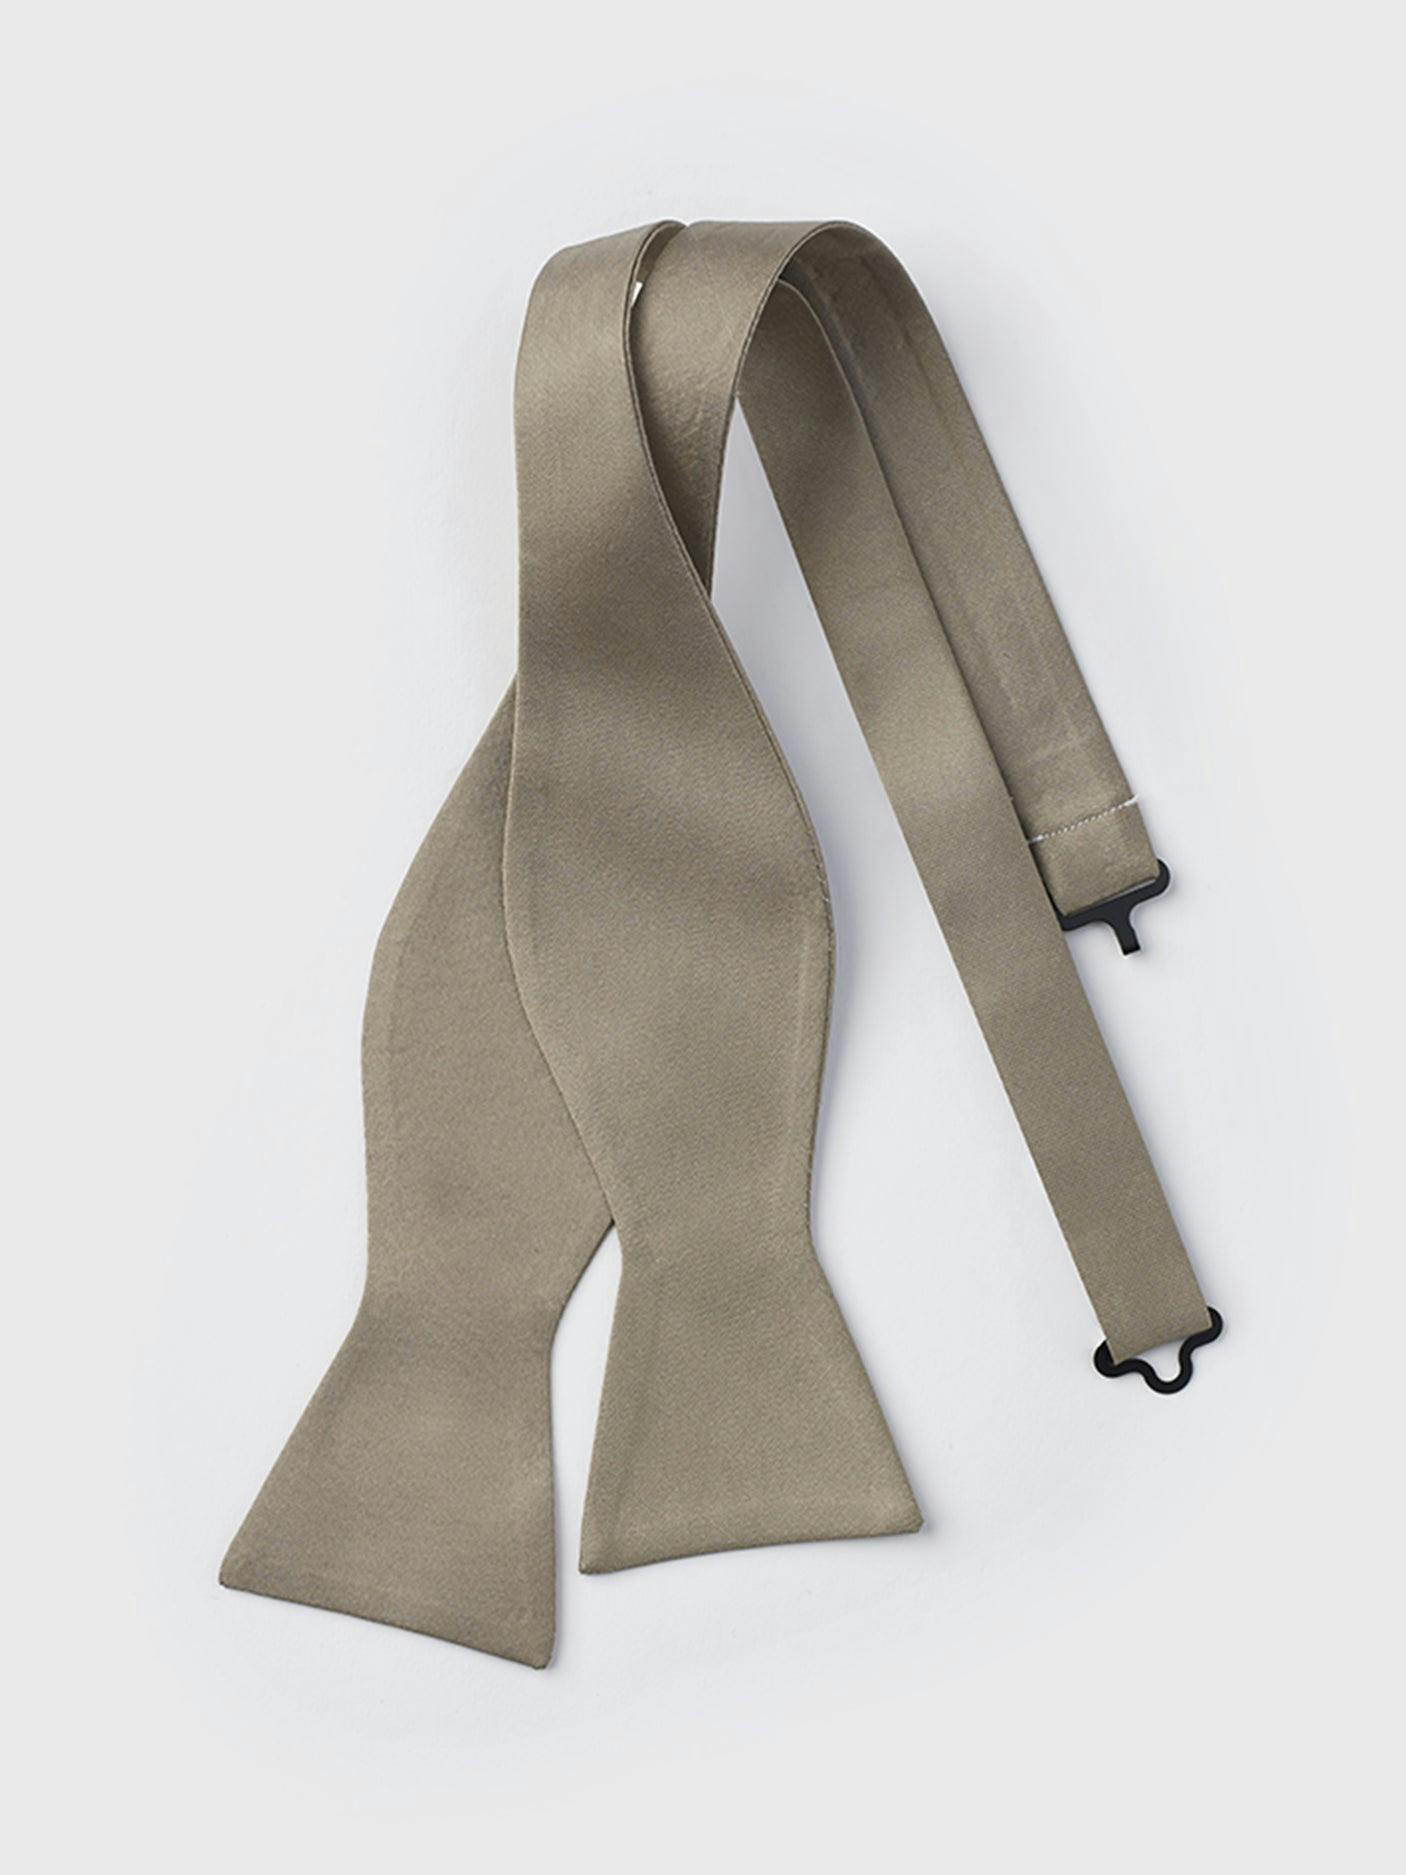 Taupe Butterfly Bow Tie